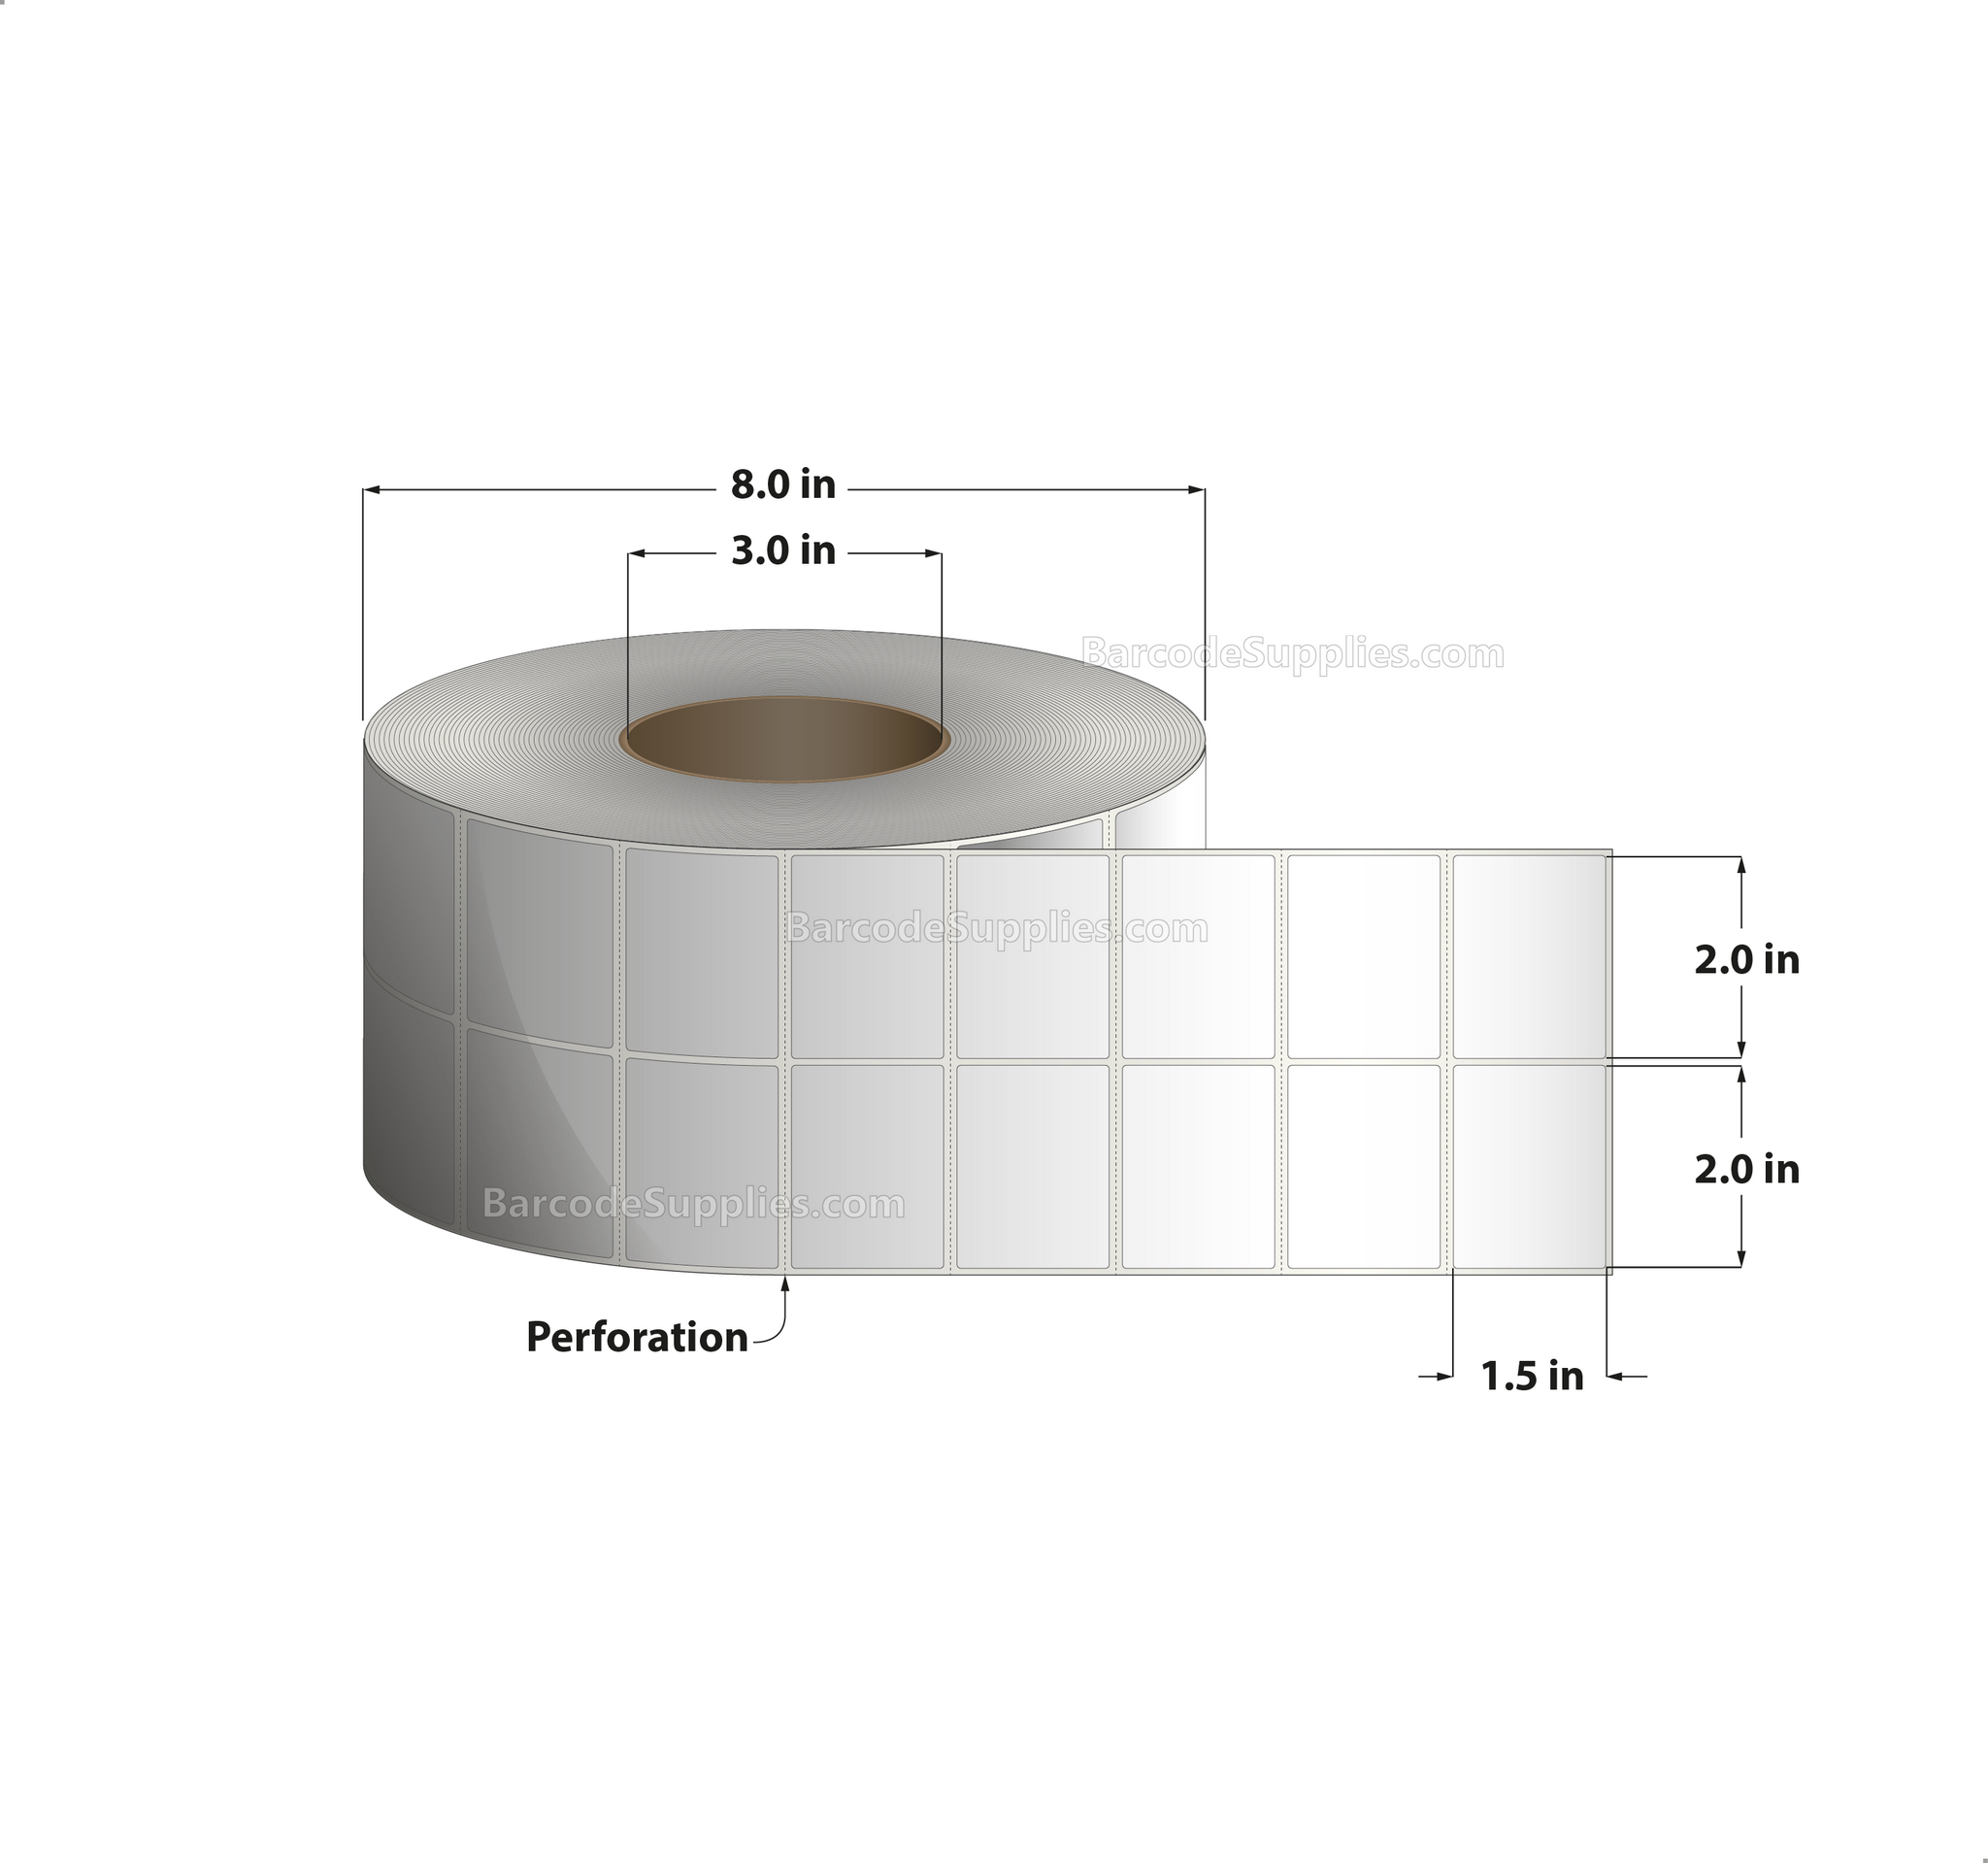 2 x 1.5 Thermal Transfer White Labels With Permanent Acrylic Adhesive - Perforated - 7000 Labels Per Roll - Carton Of 4 Rolls - 28000 Labels Total - MPN: TH215-2P